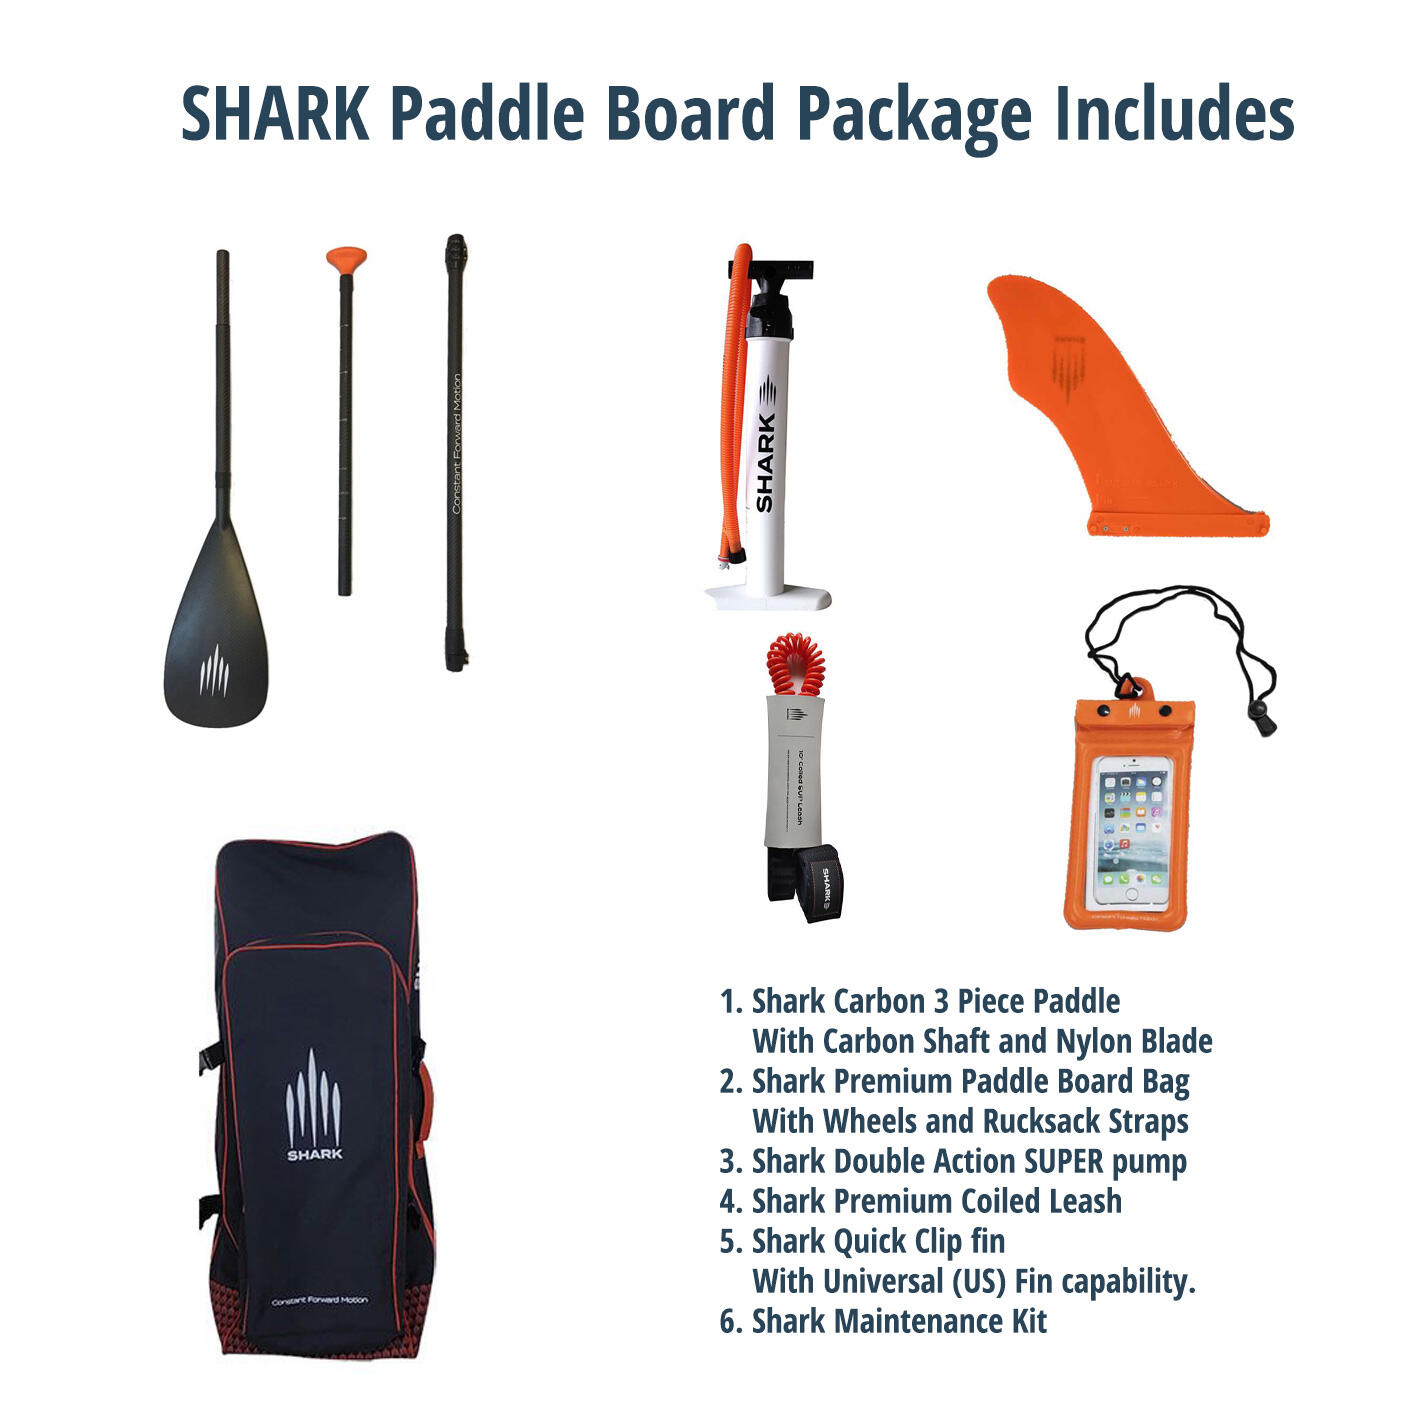 SHARK ALL ROUND 3-in-1 WIND SUP 10'6 X 32" X 5" Paddle Board 6/7